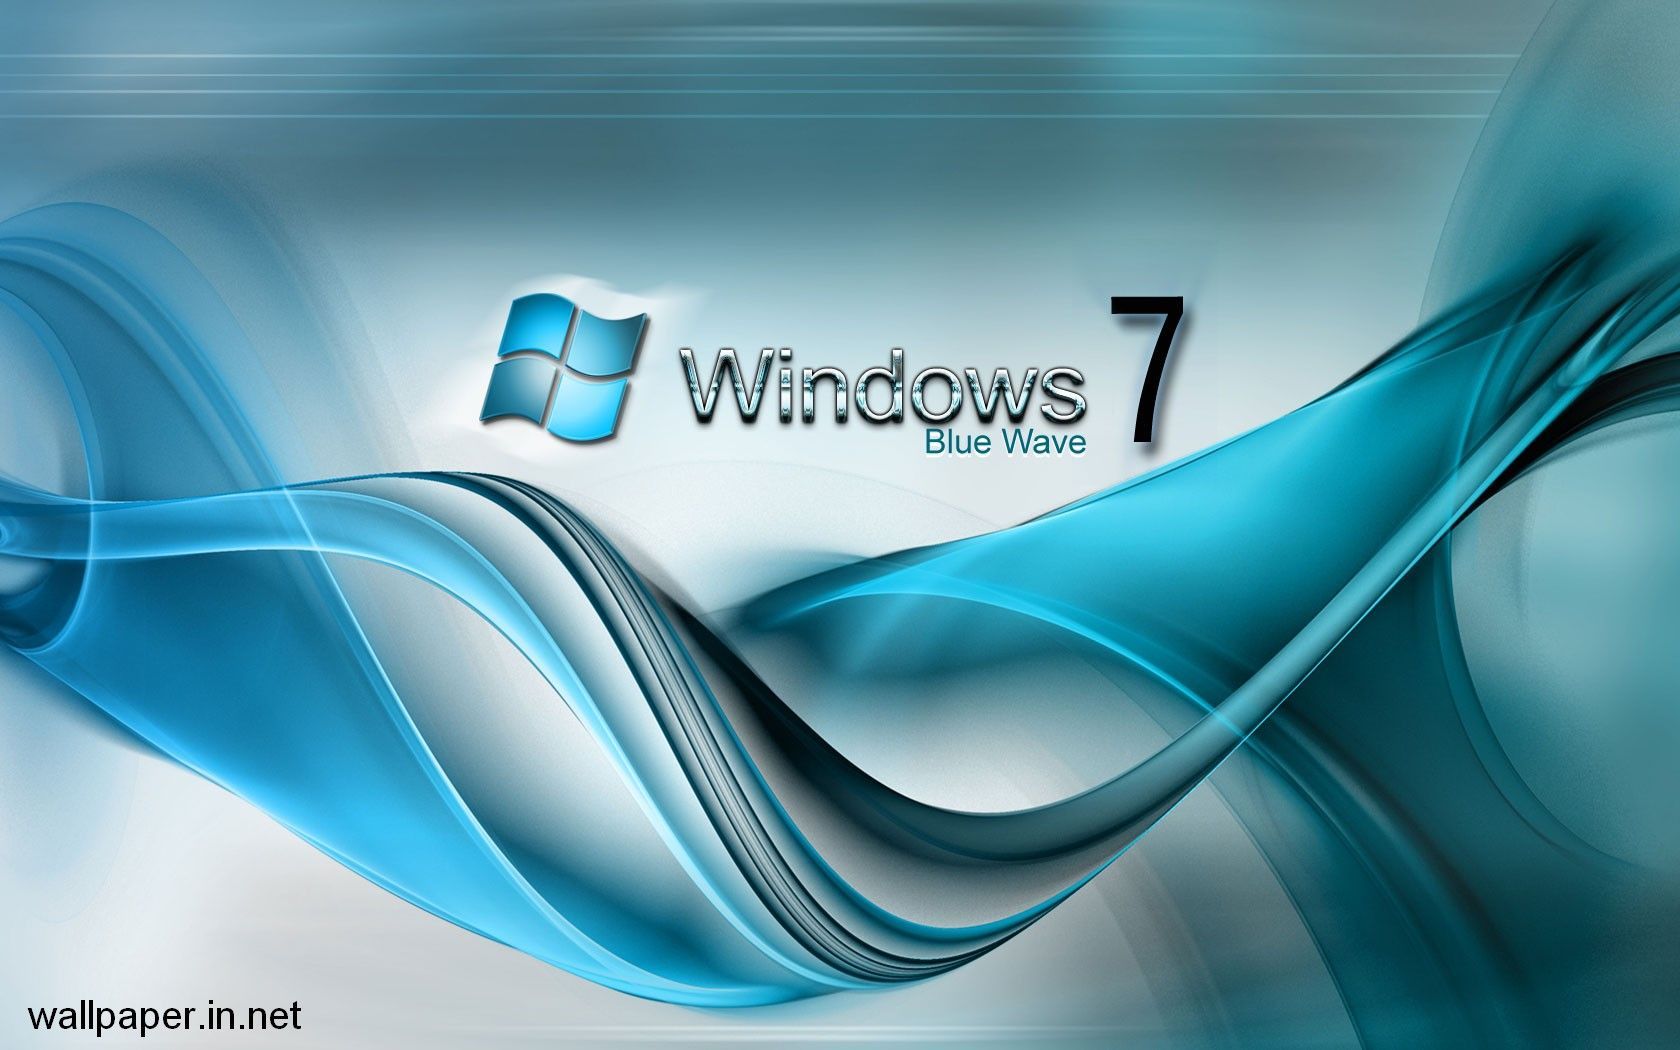 HD wallpapers for windows 7 ultimate free download